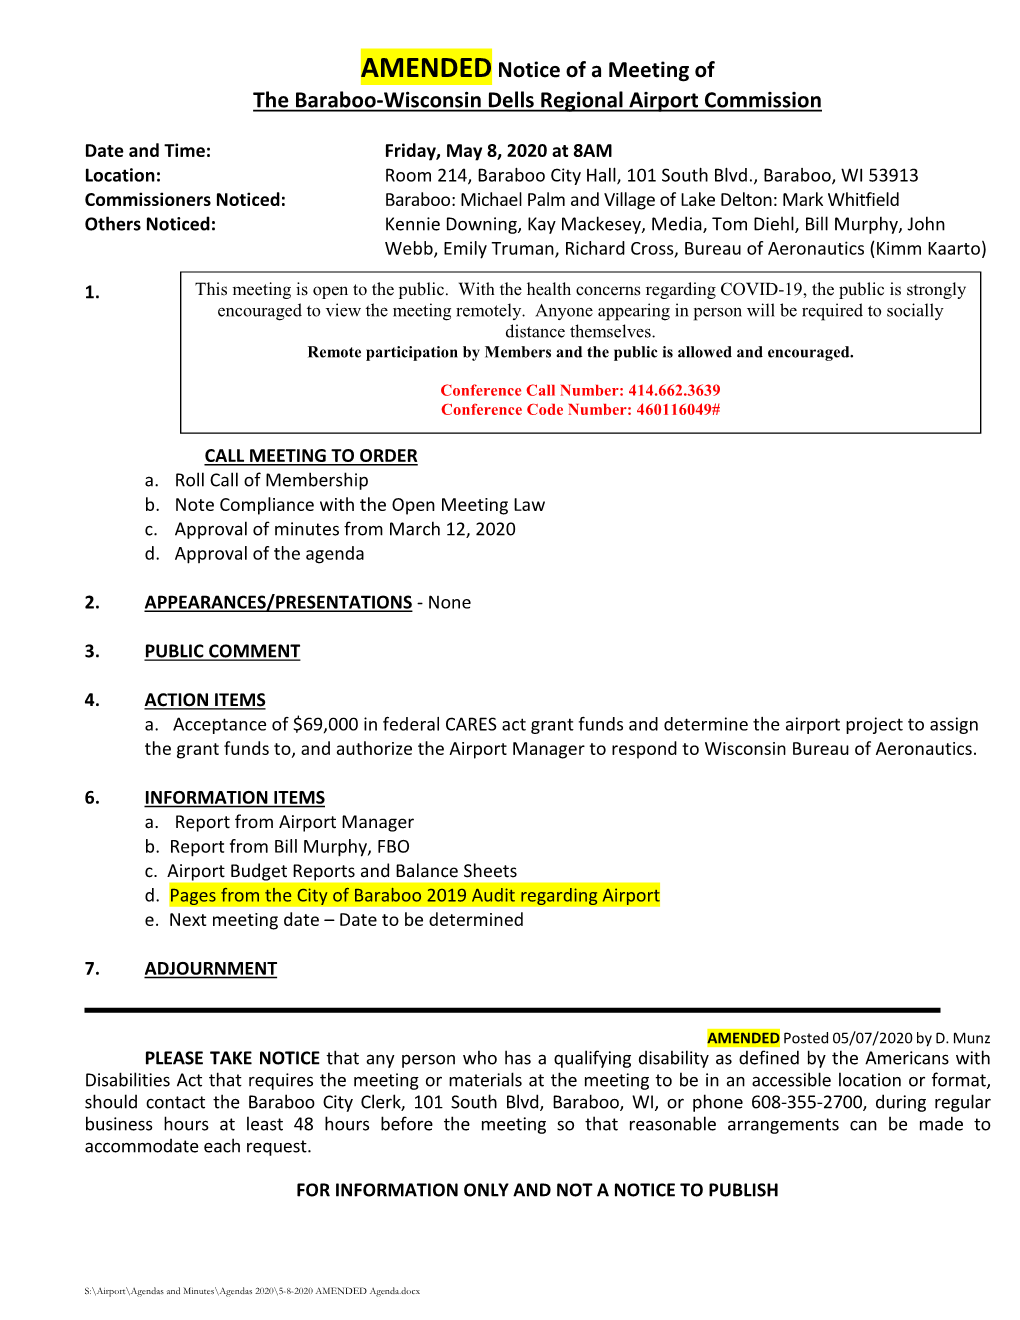 Amendednotice of a Meeting of the Baraboo-Wisconsin Dells Regional Airport Commission